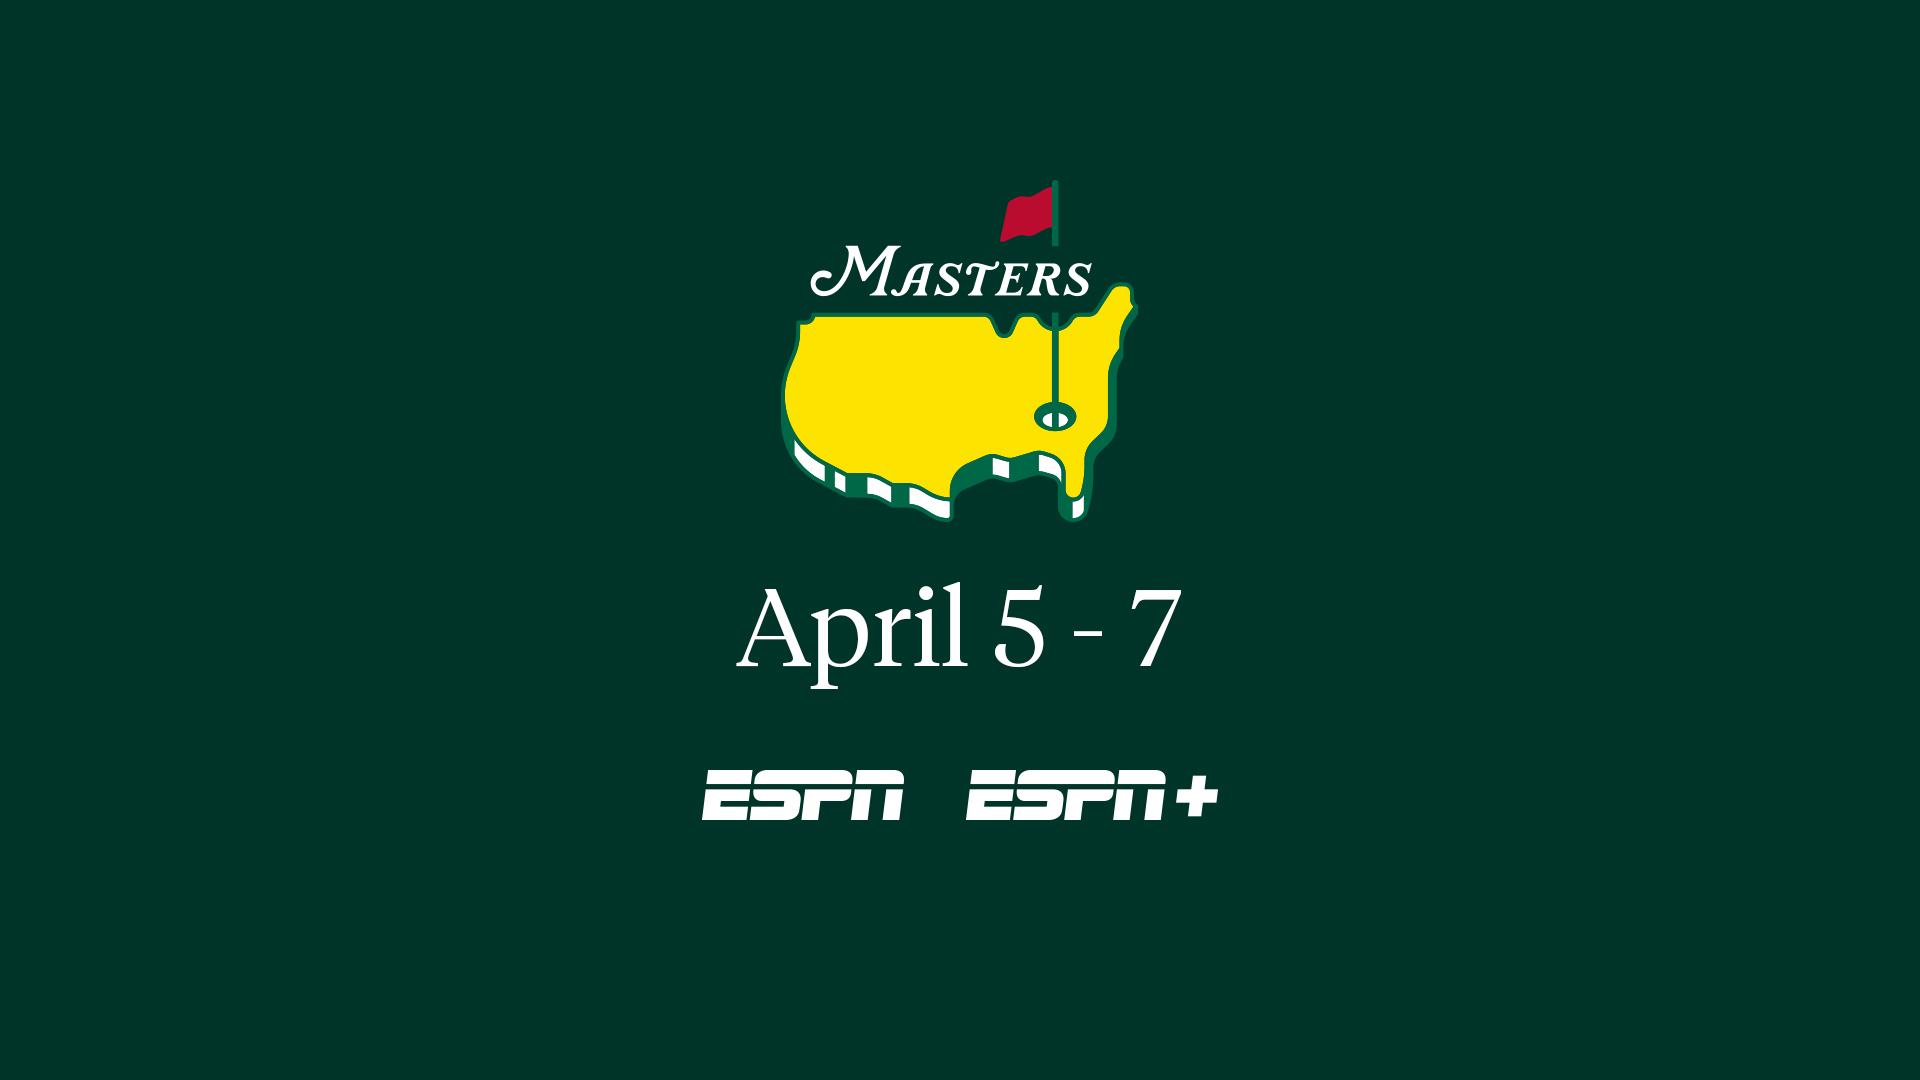 The Masters How To Watch, TV Schedule and Top Storylines